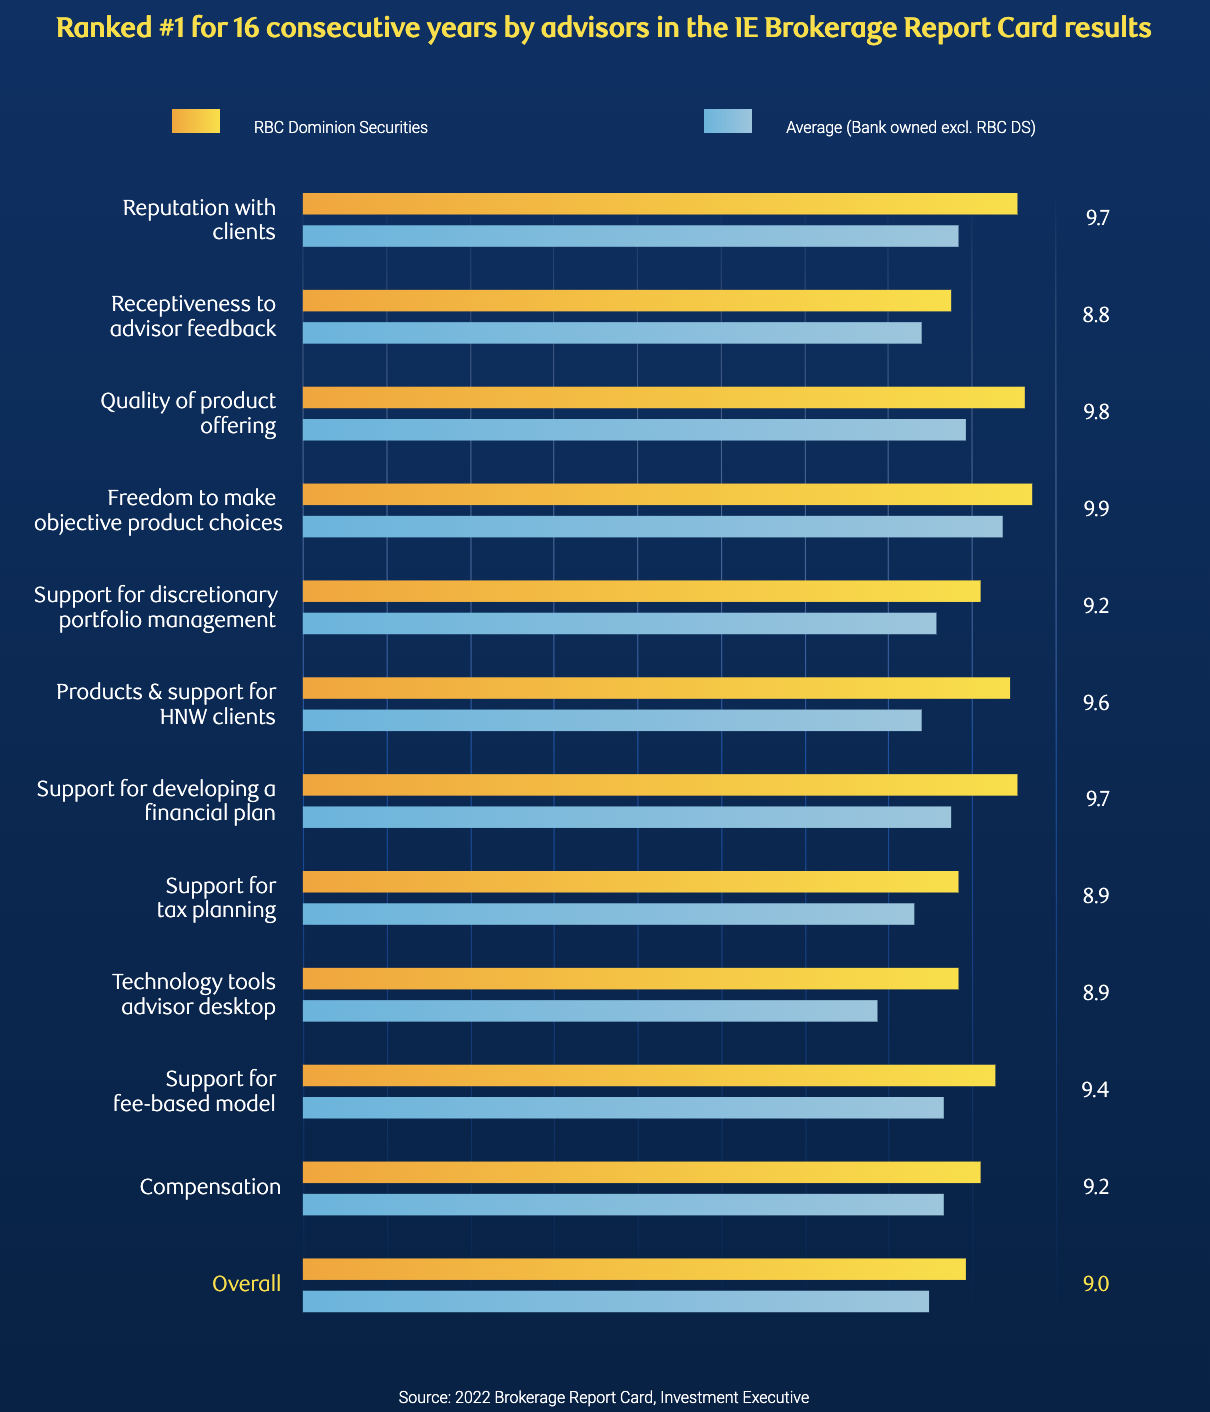 Chart shows RBC DS received higher marks than other bank-owned wealth management firms in the following areas: Reputation with clients and prospects (9.7) Receptiveness to advisor feedback (8.8) Quality of product offering (9.8) Freedom to make objective product choices (9.9) Support for discretionary portfolio management (9.2) Product & support for high-net-worth clients (9.6) Support for developing a financial plan for clients (9.7) Support for tax planning (8.9) Technology tools & advisor desktop (8.9) Support for fee-based models (9.4) Quality of product offering (9.8) Compensation (9.2) Overall (9.0) 